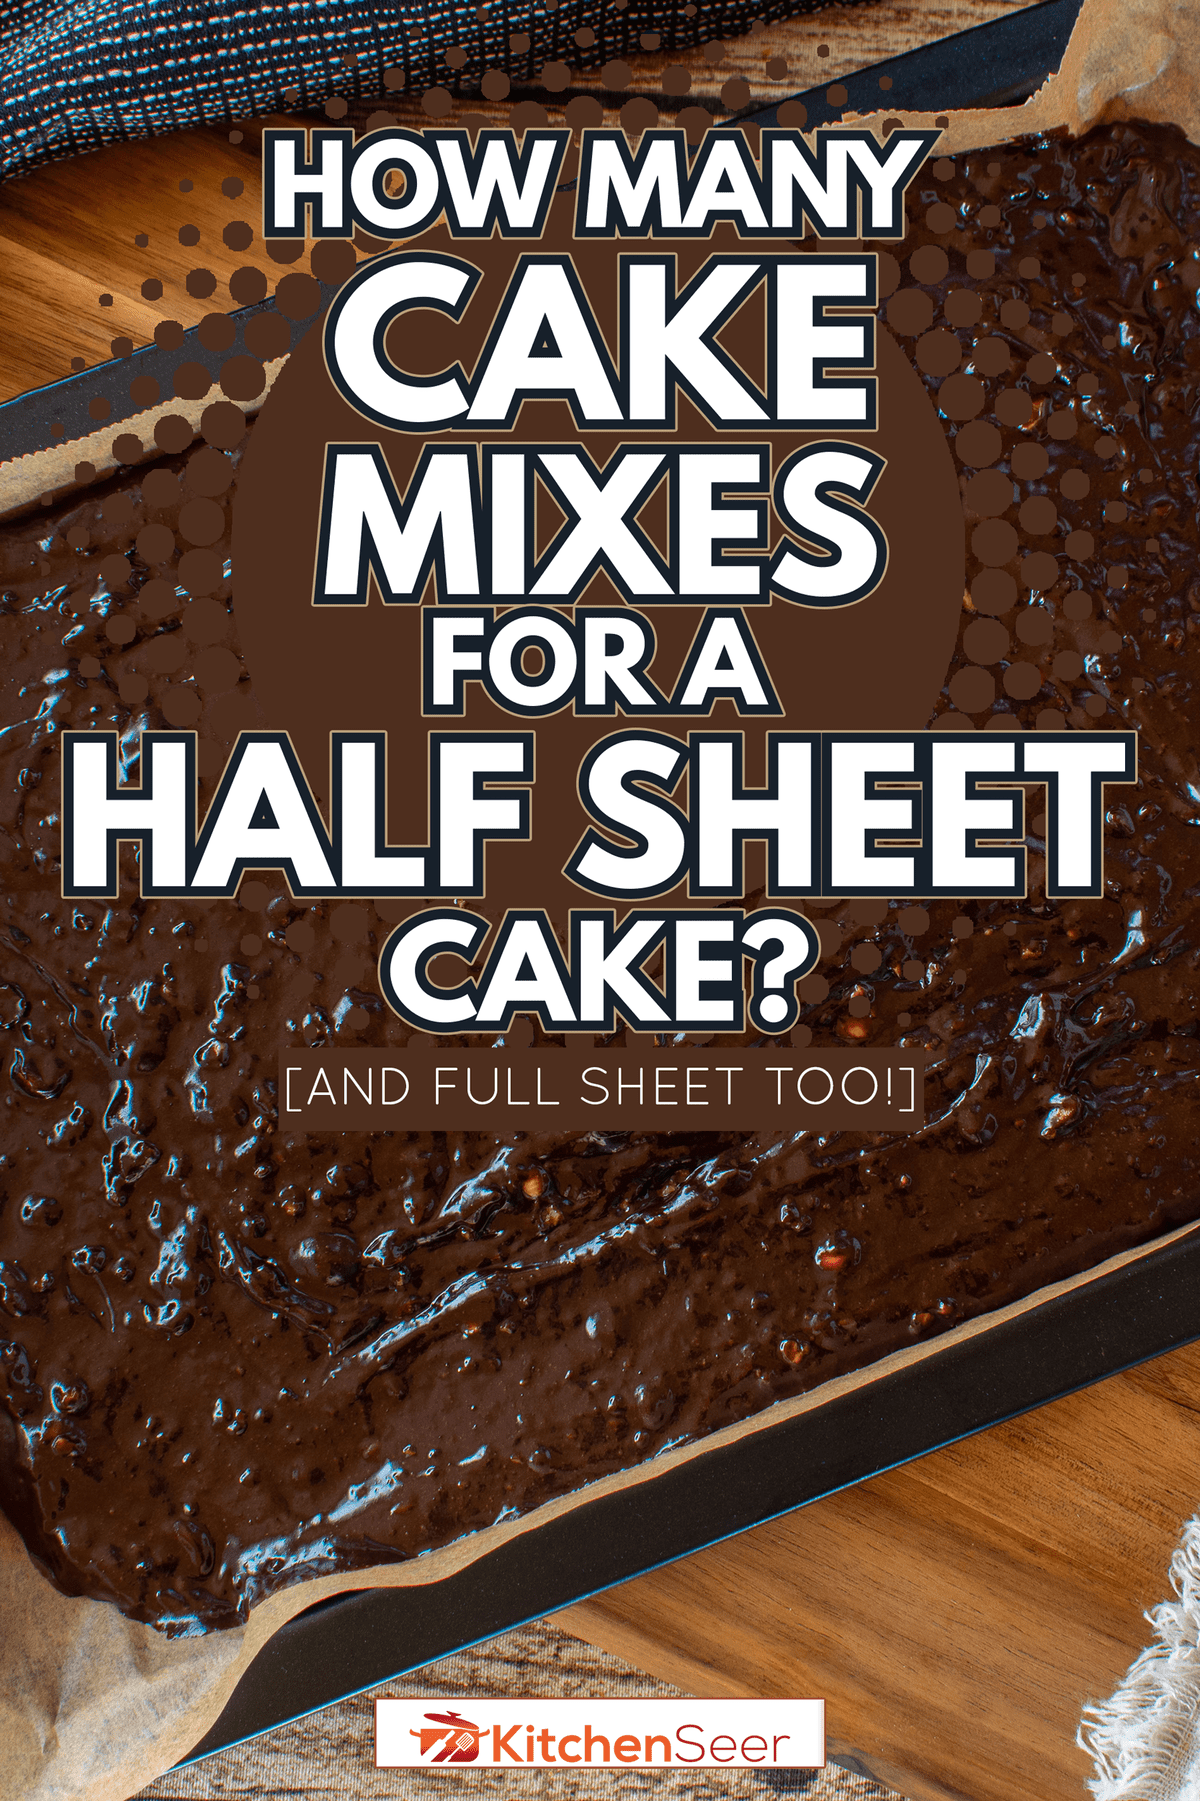 How Many Cake Mixes For A Half Sheet Cake? [And Full Sheet Too!]